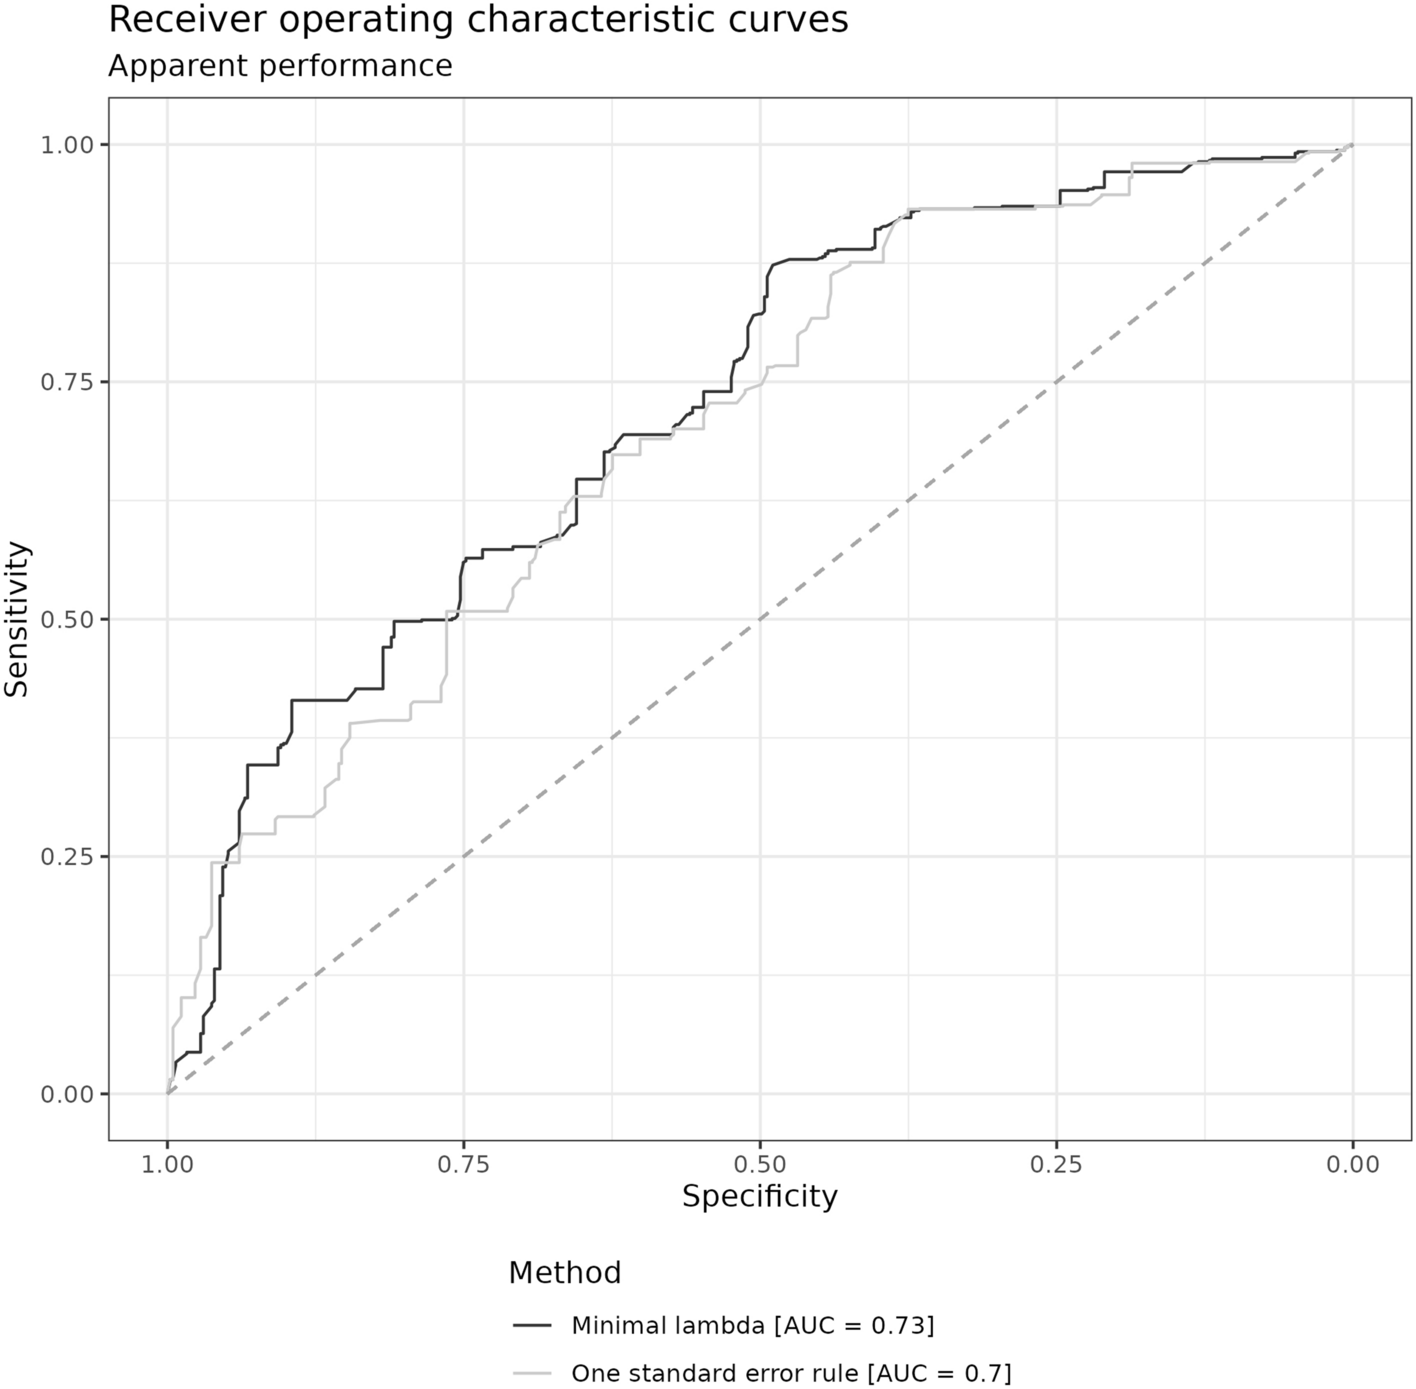 A Prediction Model for Successful Increase of Adalimumab Dose Intervals in Patients with Crohn’s Disease: Secondary Analysis of the Pragmatic Open-Label Randomised Controlled Non-inferiority LADI Trial